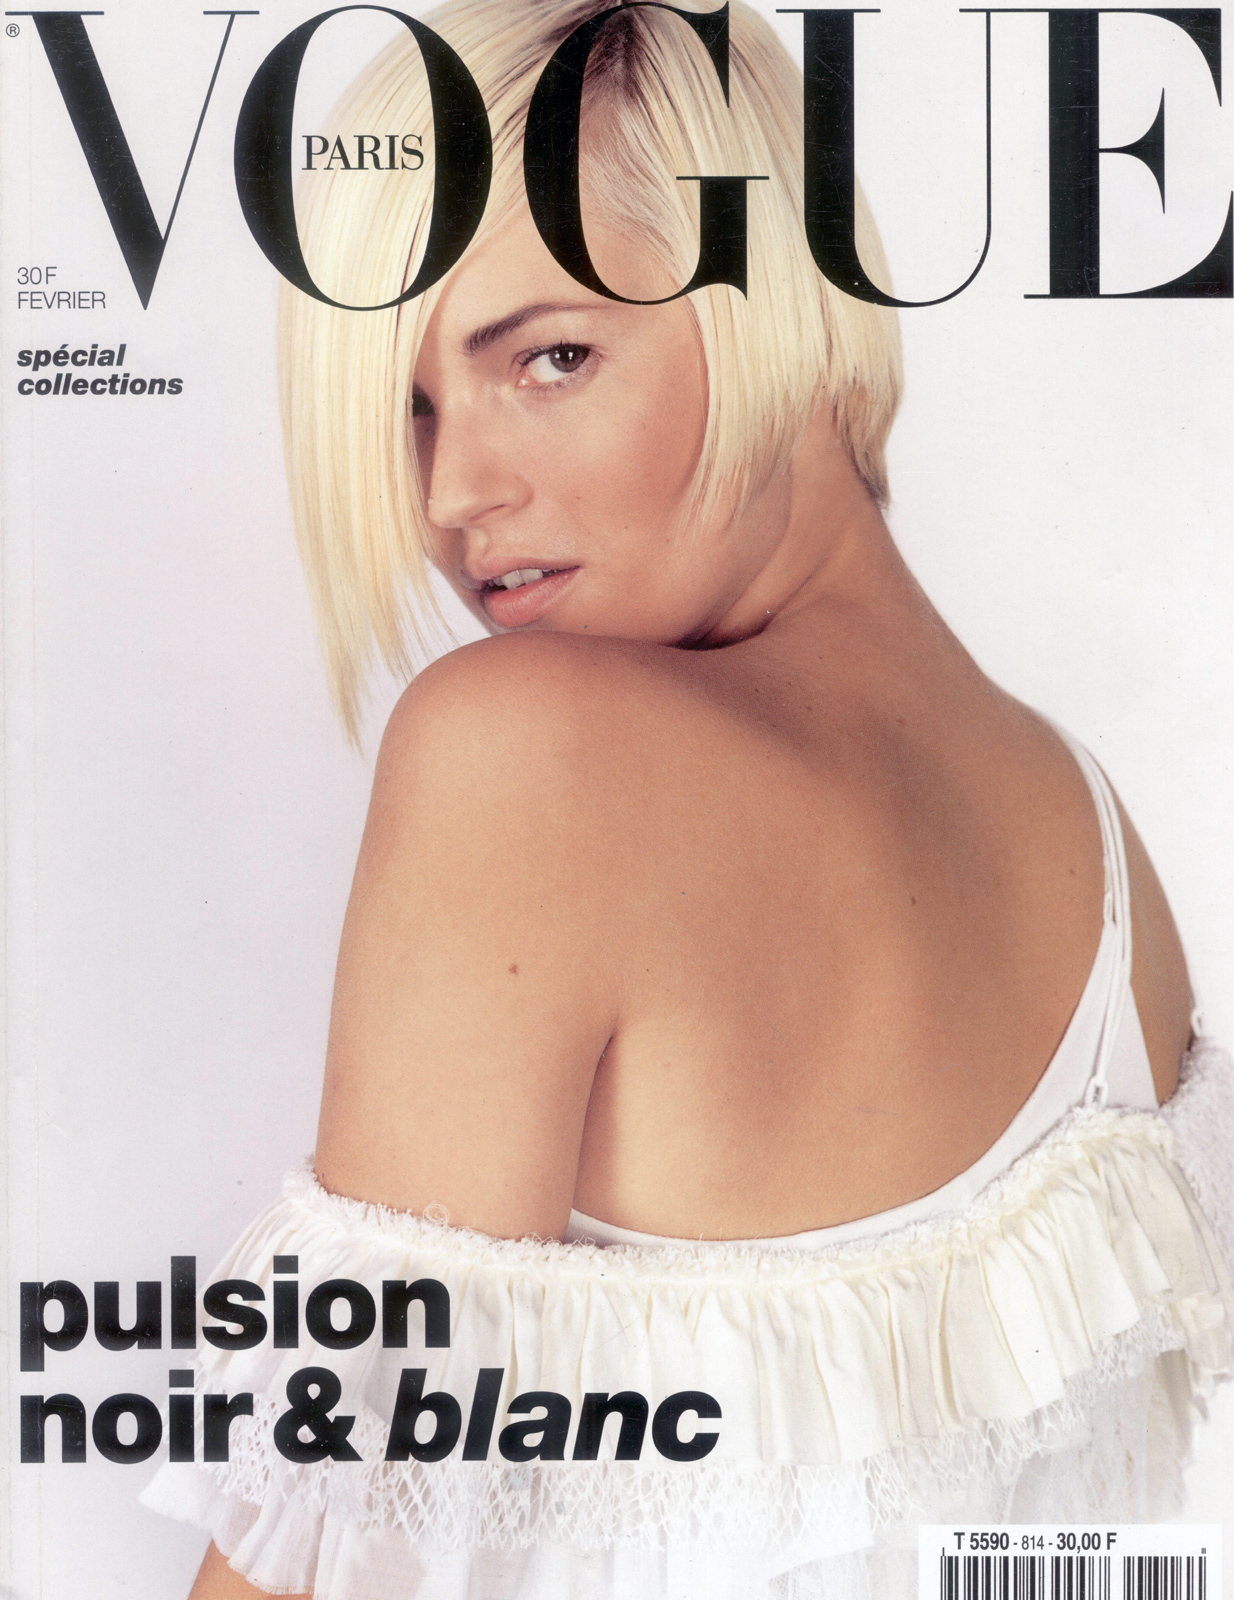 Kate Moss by Inez & Vinoodh for the cover of Vogue Nippon, February 2008